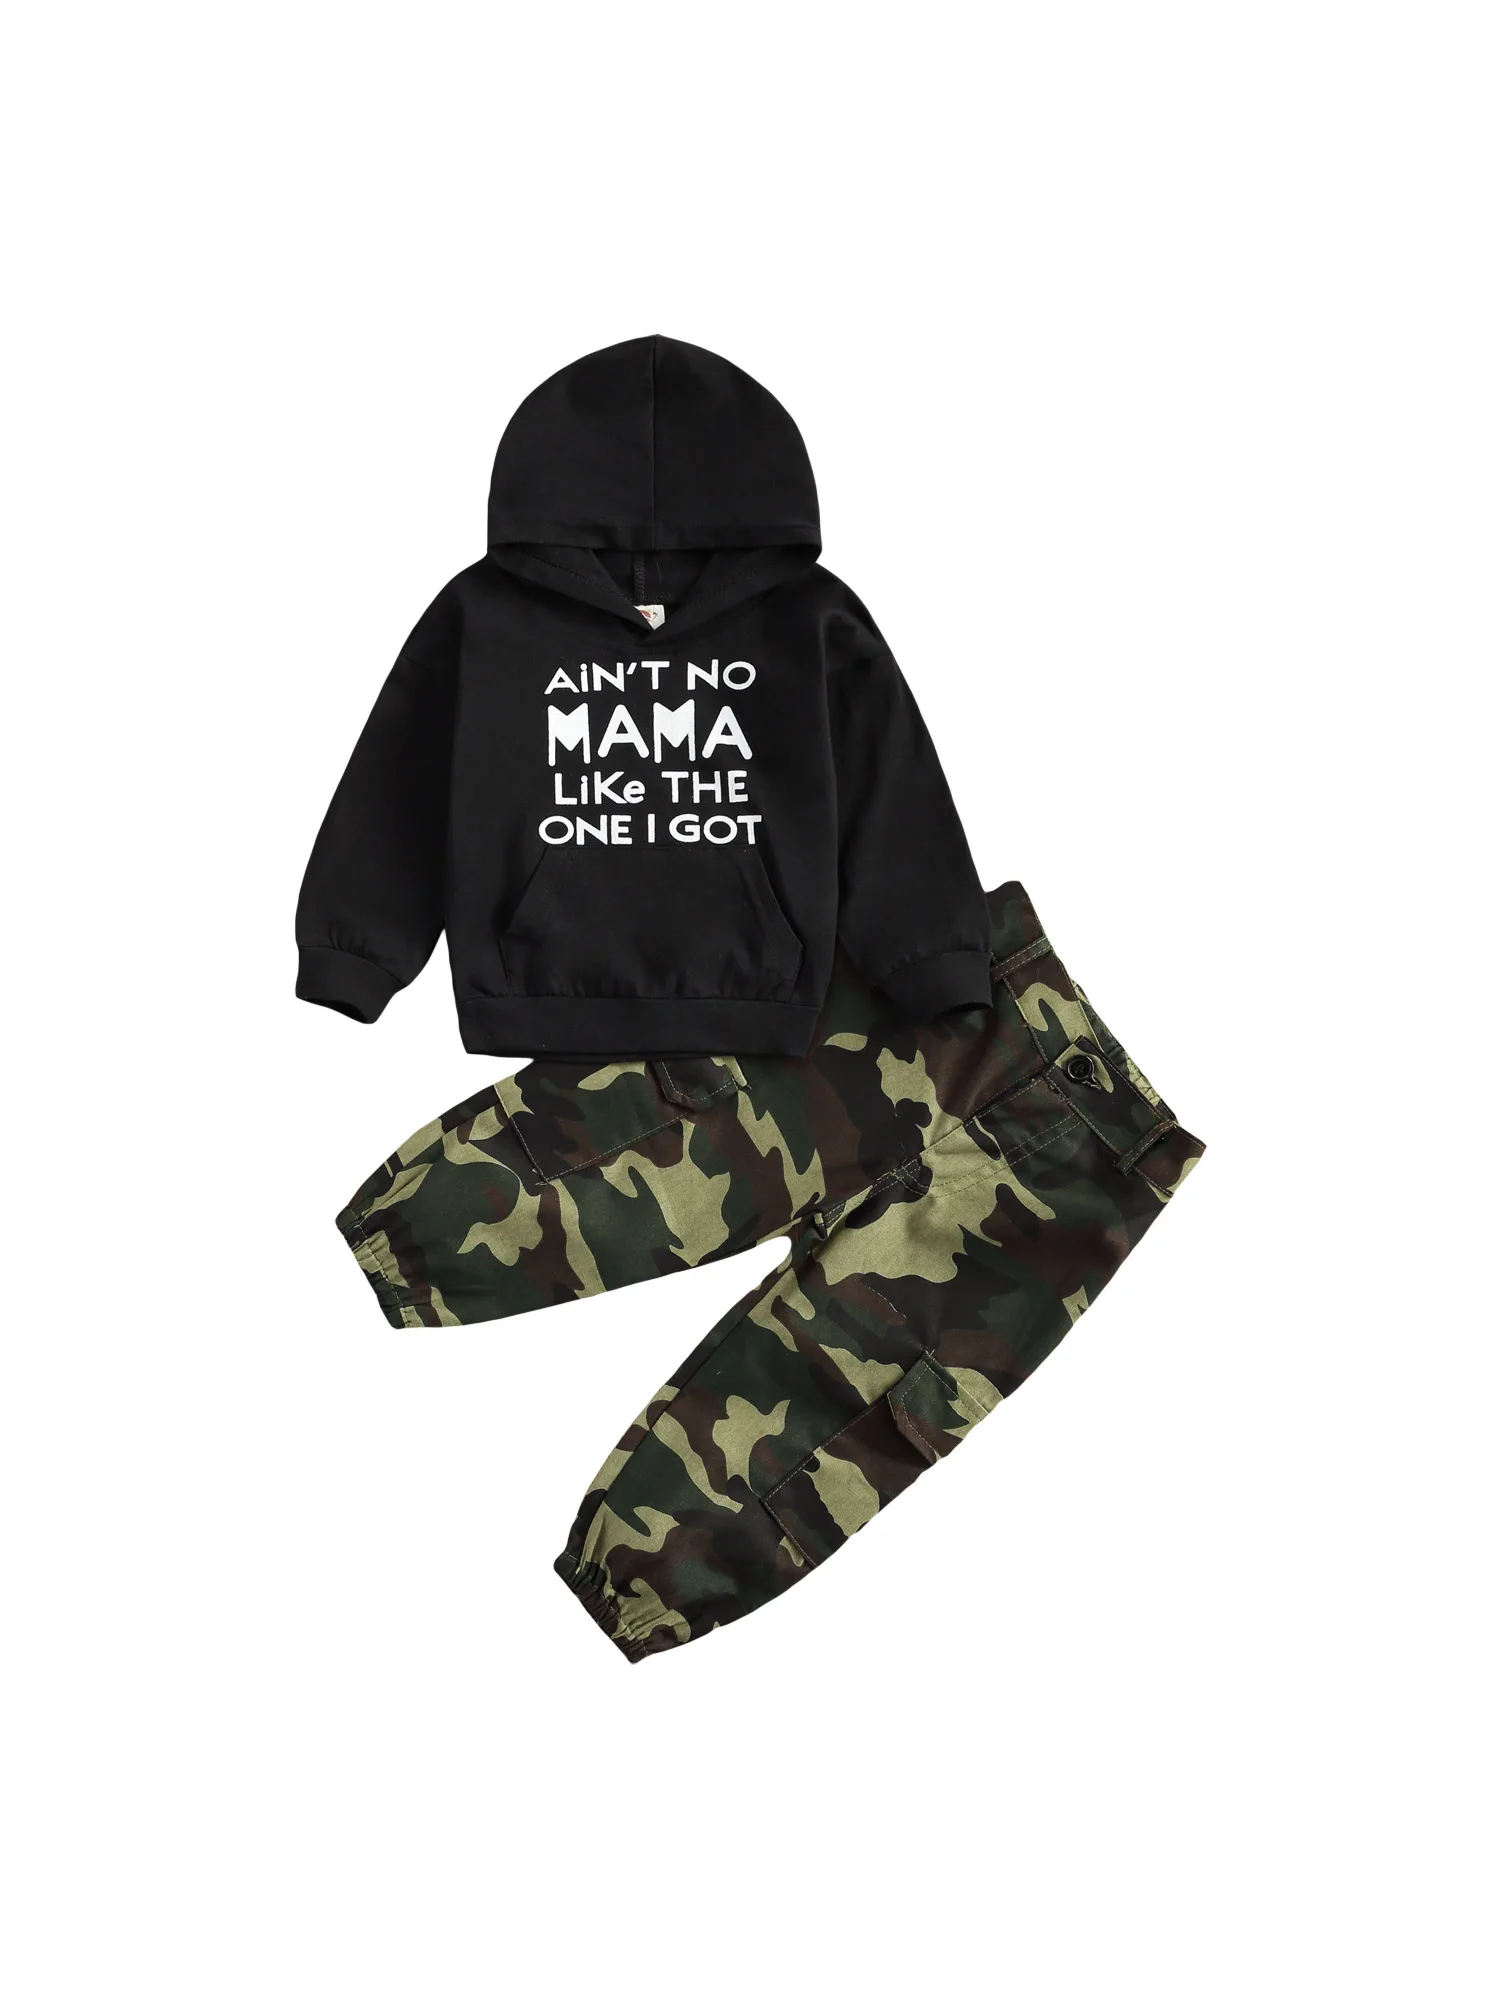 

Kids Baby Boys 18M-6T 2-piece Outfit Set Long Sleeve Letter Print Hoodie+Camouflage Cargo Pants Set